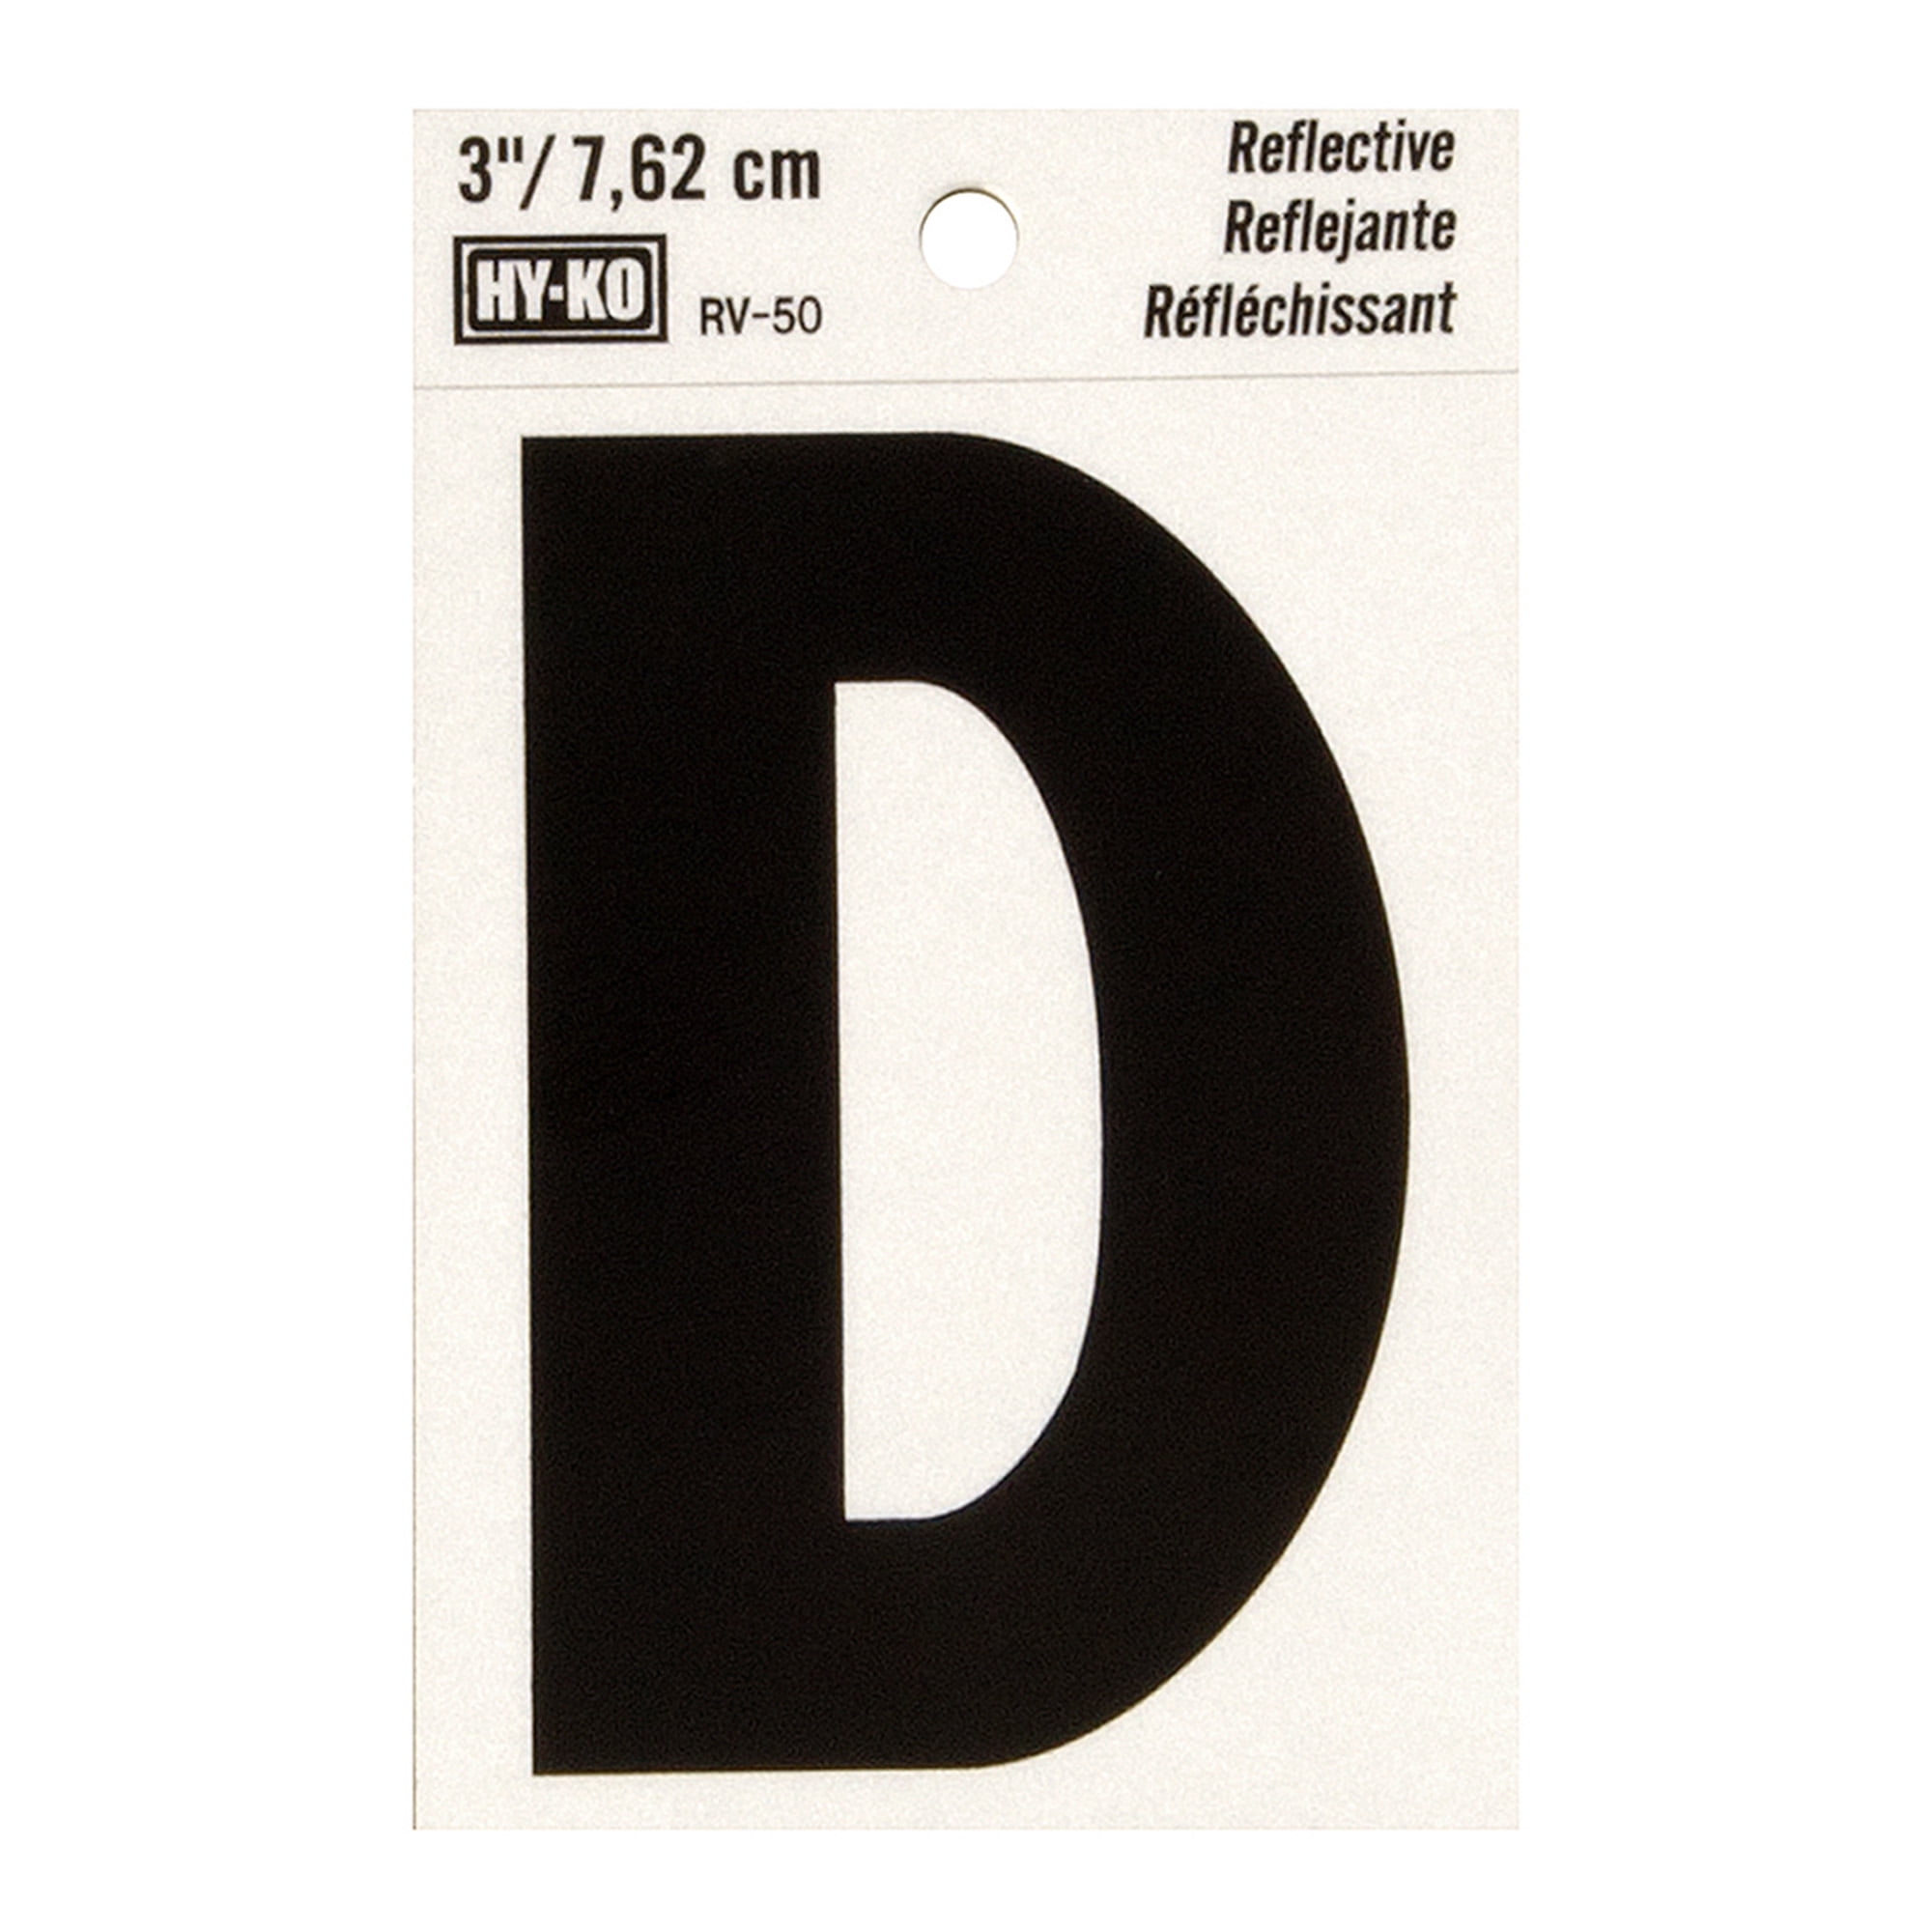 W 30433 Pack of 10 Non-Reflective Adhesive Letter Hy-Ko Vinyl 3 In 